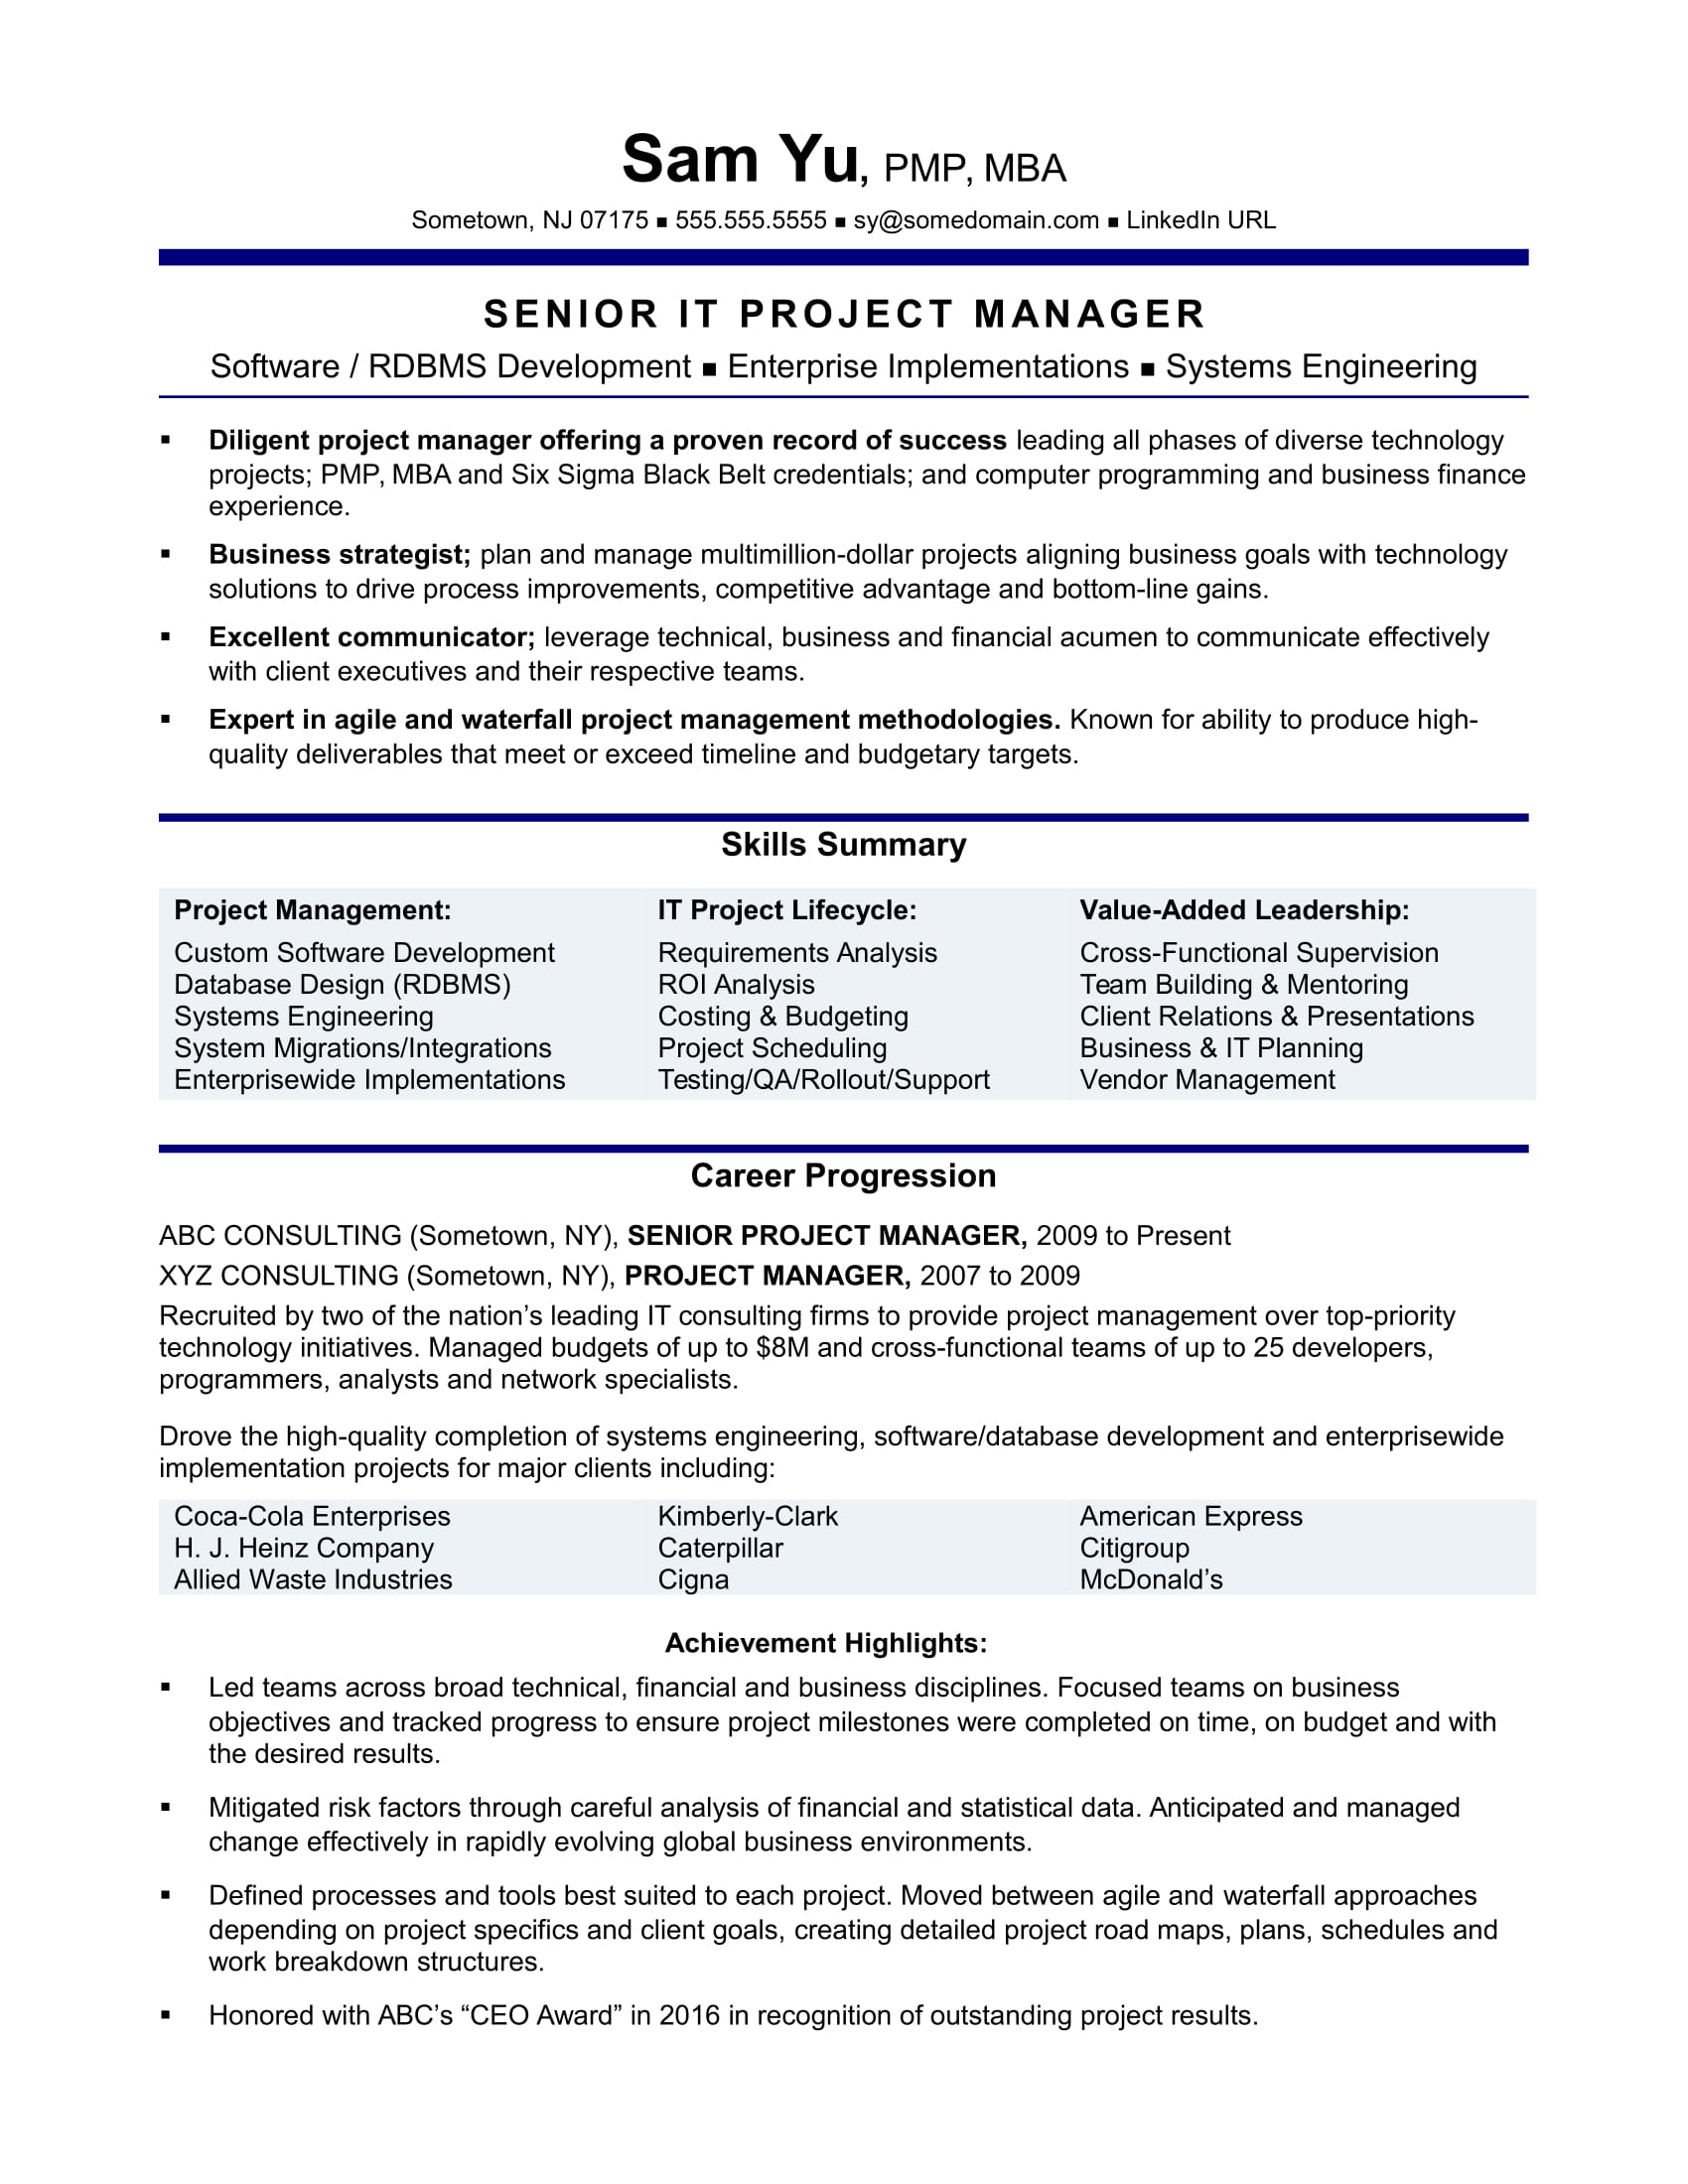 Experienced It Project Manager Resume Sample Monster inside proportions 1700 X 2200